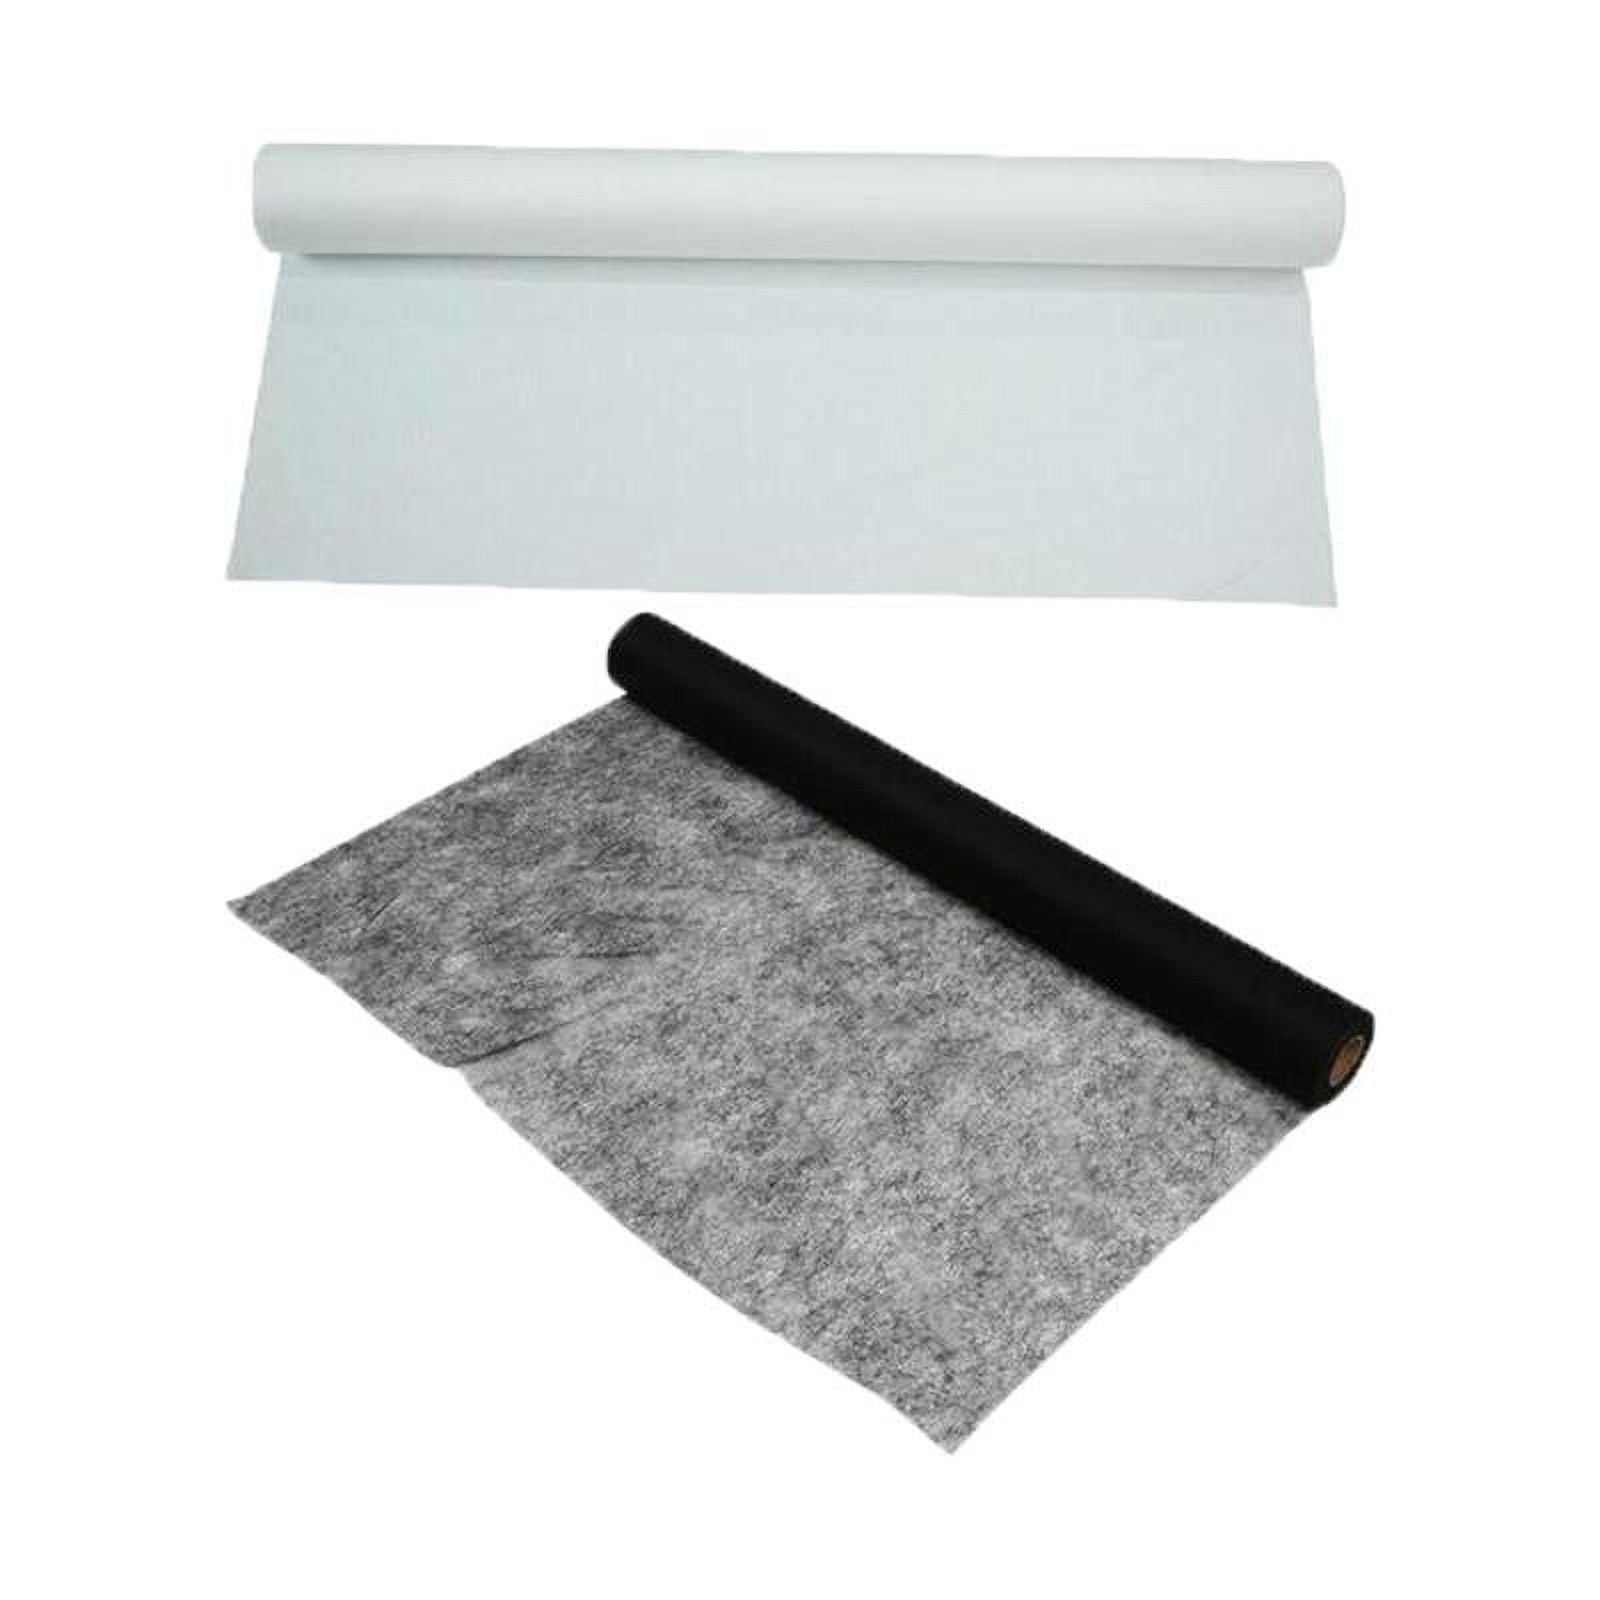 PLANTIONAL Medium Weight Fusible Bonding Web: 20 Sheets (8 x 12) Fusible  Webbing for Fabric Applique DIY Crafts Supplies